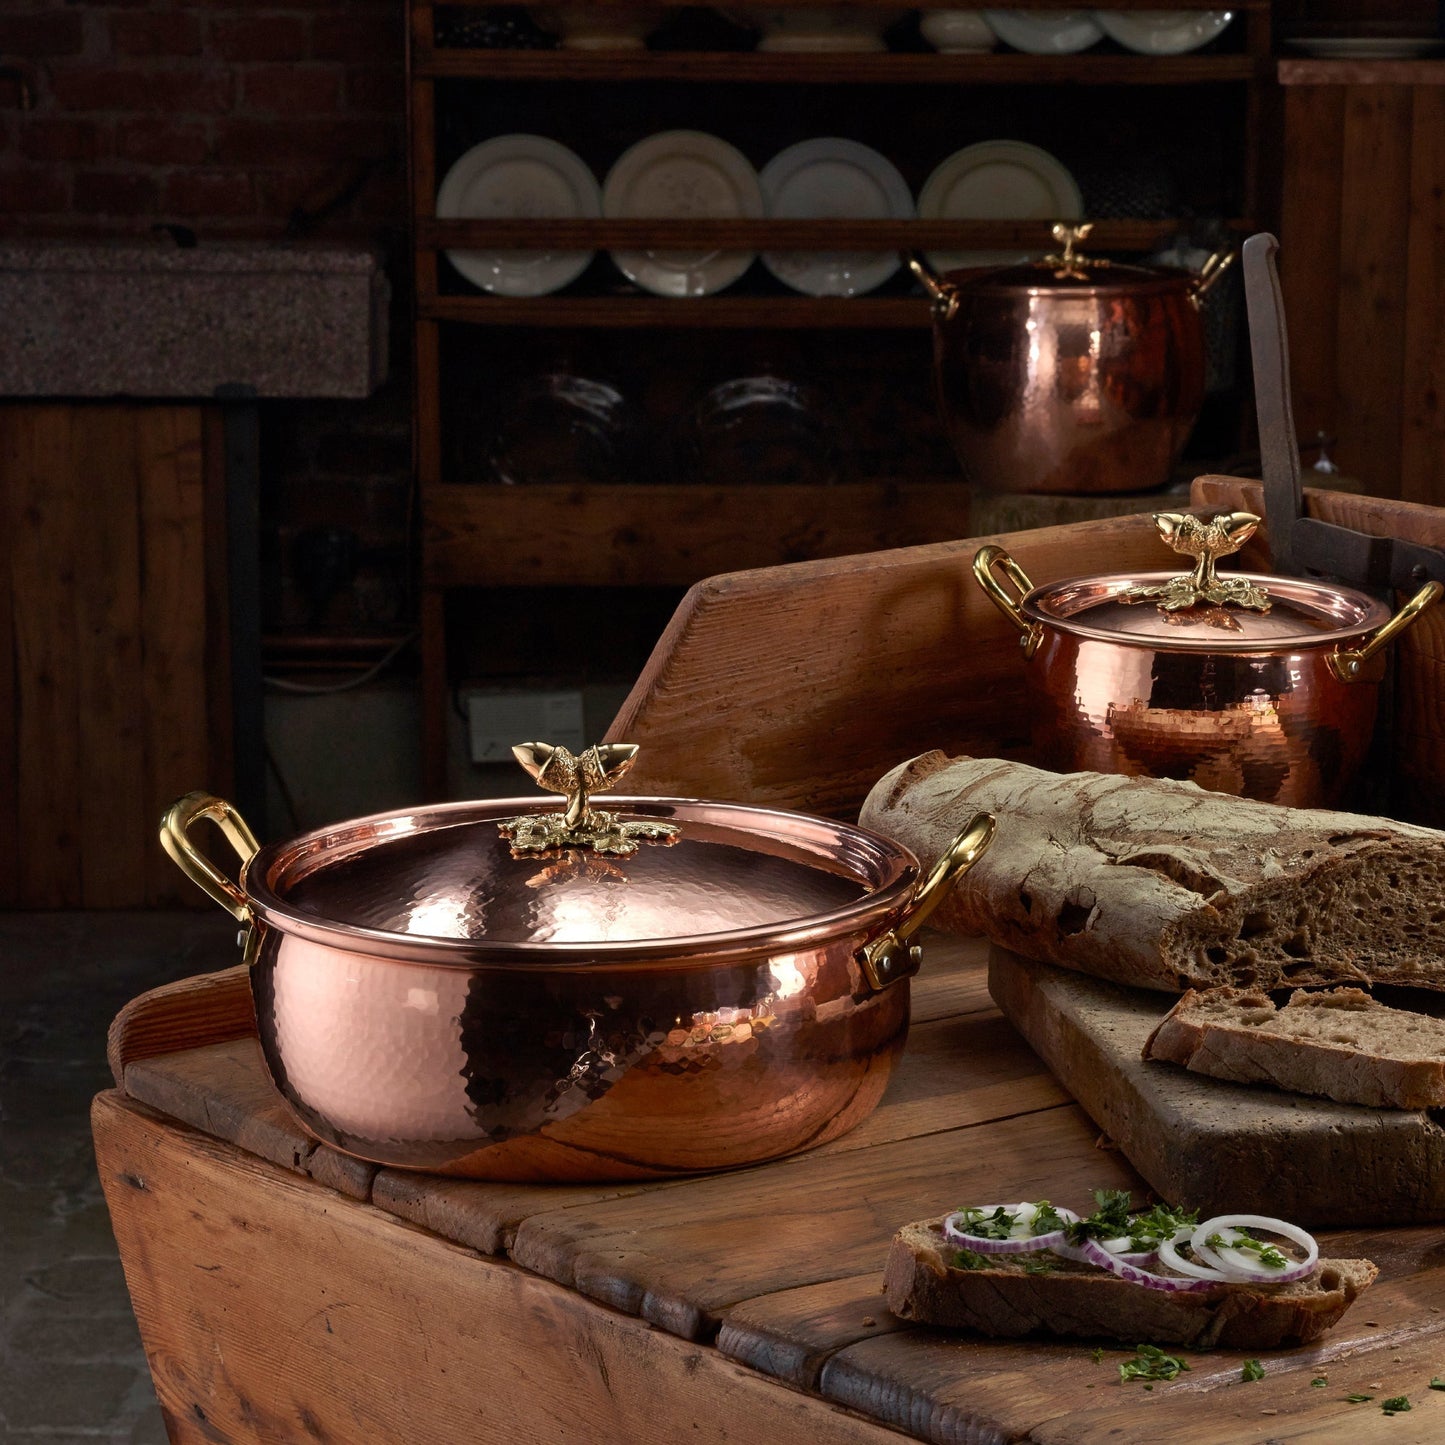 Hammered copper 6 Qt Braiser lined with high purity tin applied by hand over fire and bronze handles, from Ruffoni Historia collection